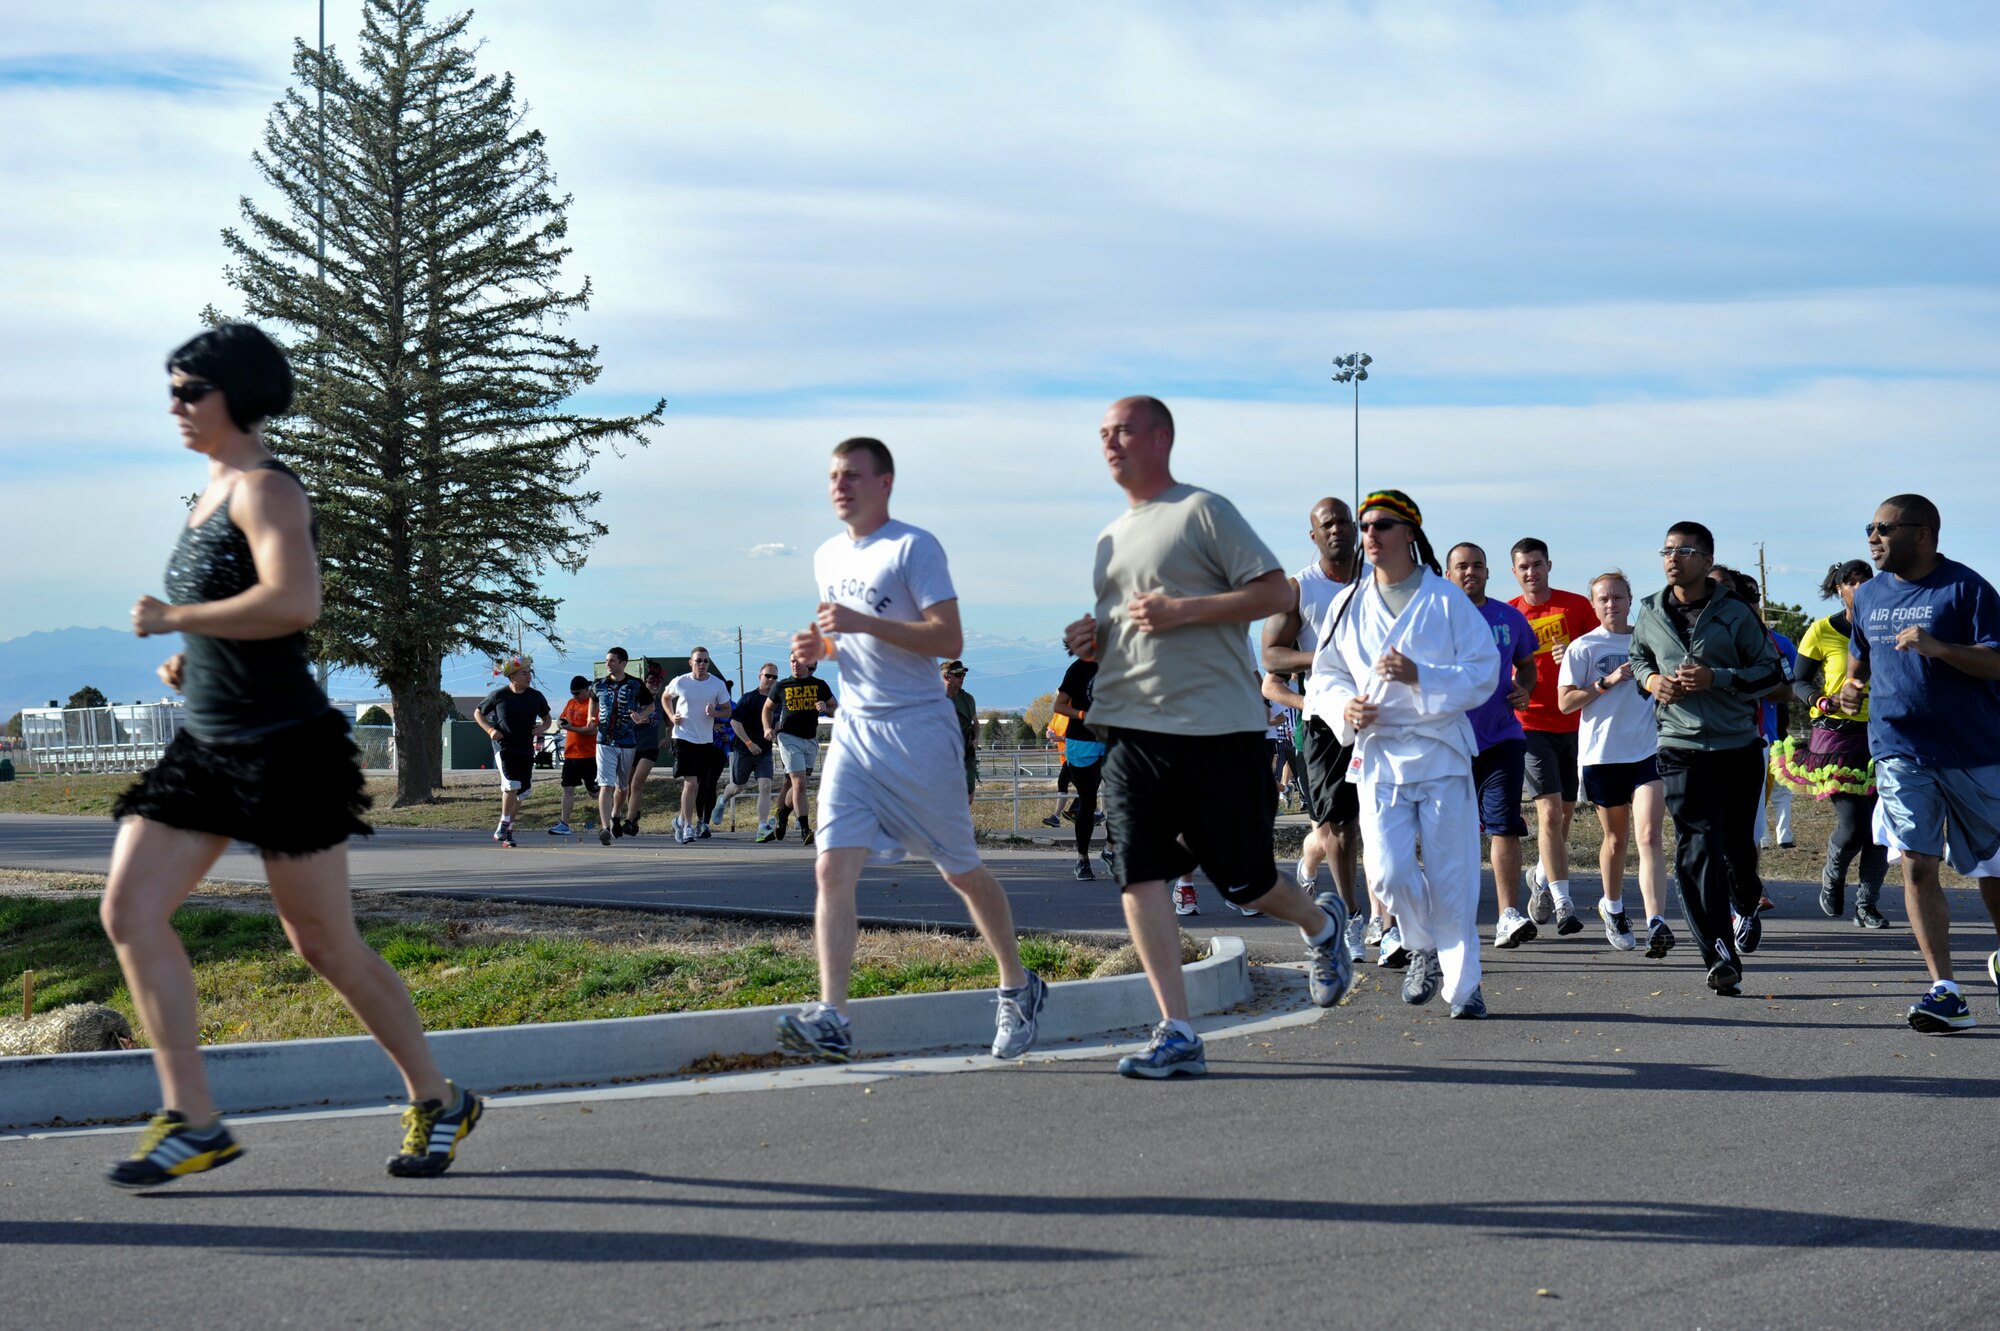 BUCKLEY AIR FORCE BASE, Colo. – Racers begin Buckley's Dreadful Dash 5K Oct. 31, 2012, at the fitness center track. The race concluded at the community center, and people with the best costumes received prizes. (U.S. Air Force photo by Senior Airman Christopher Gross)